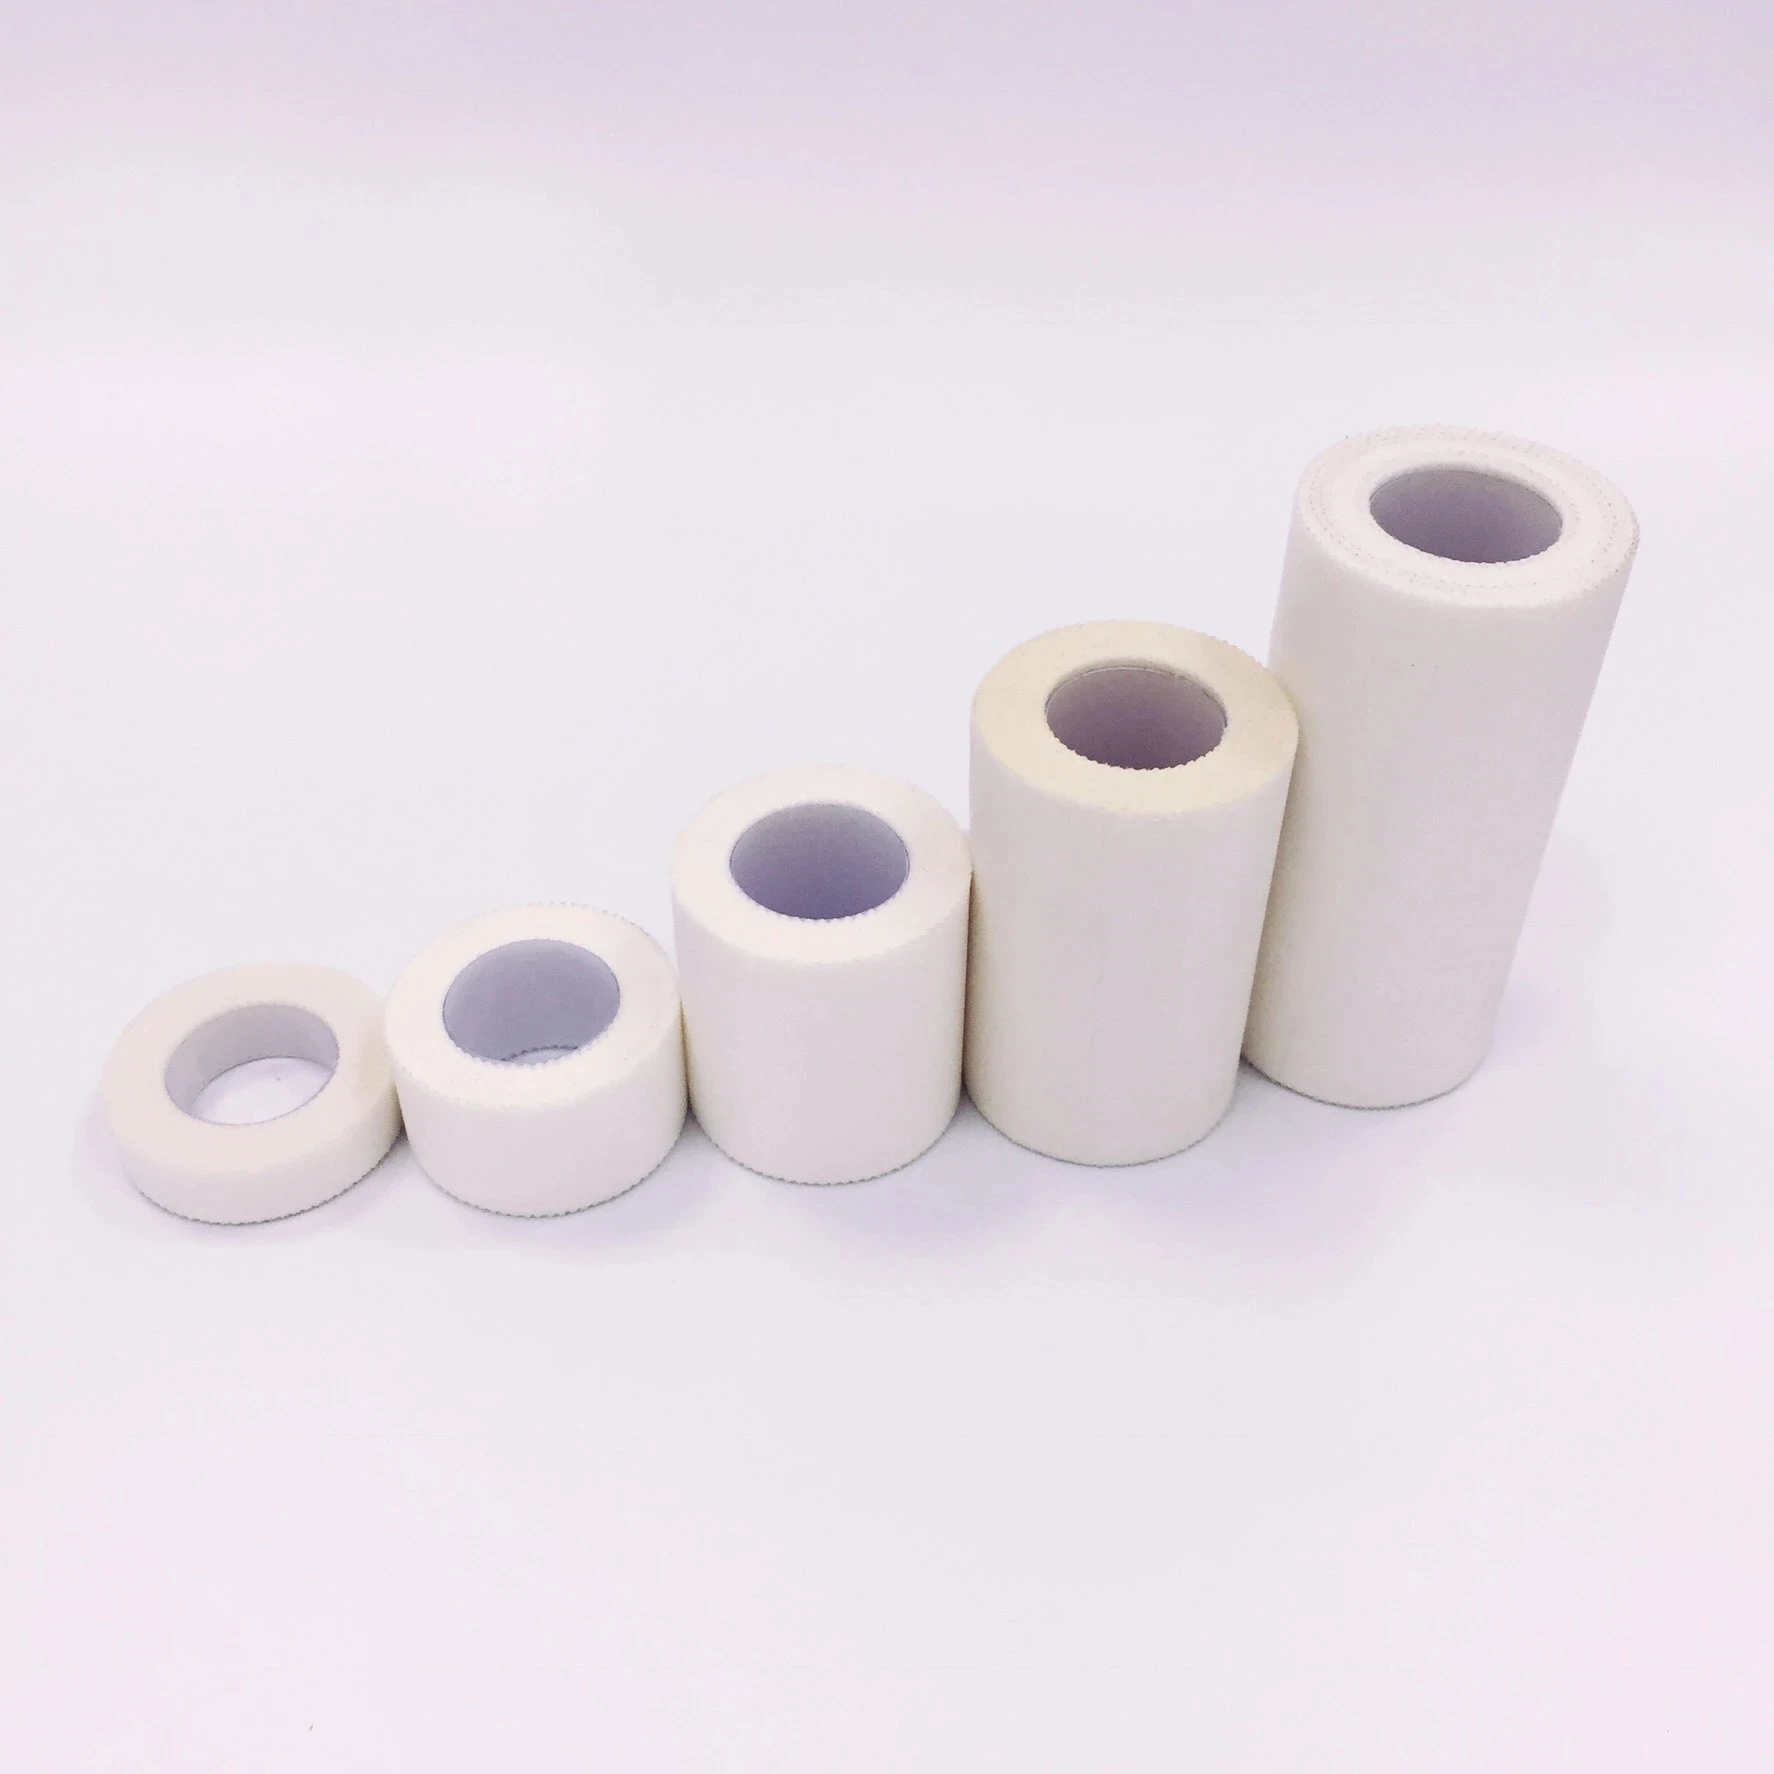 surgical adhesive tape